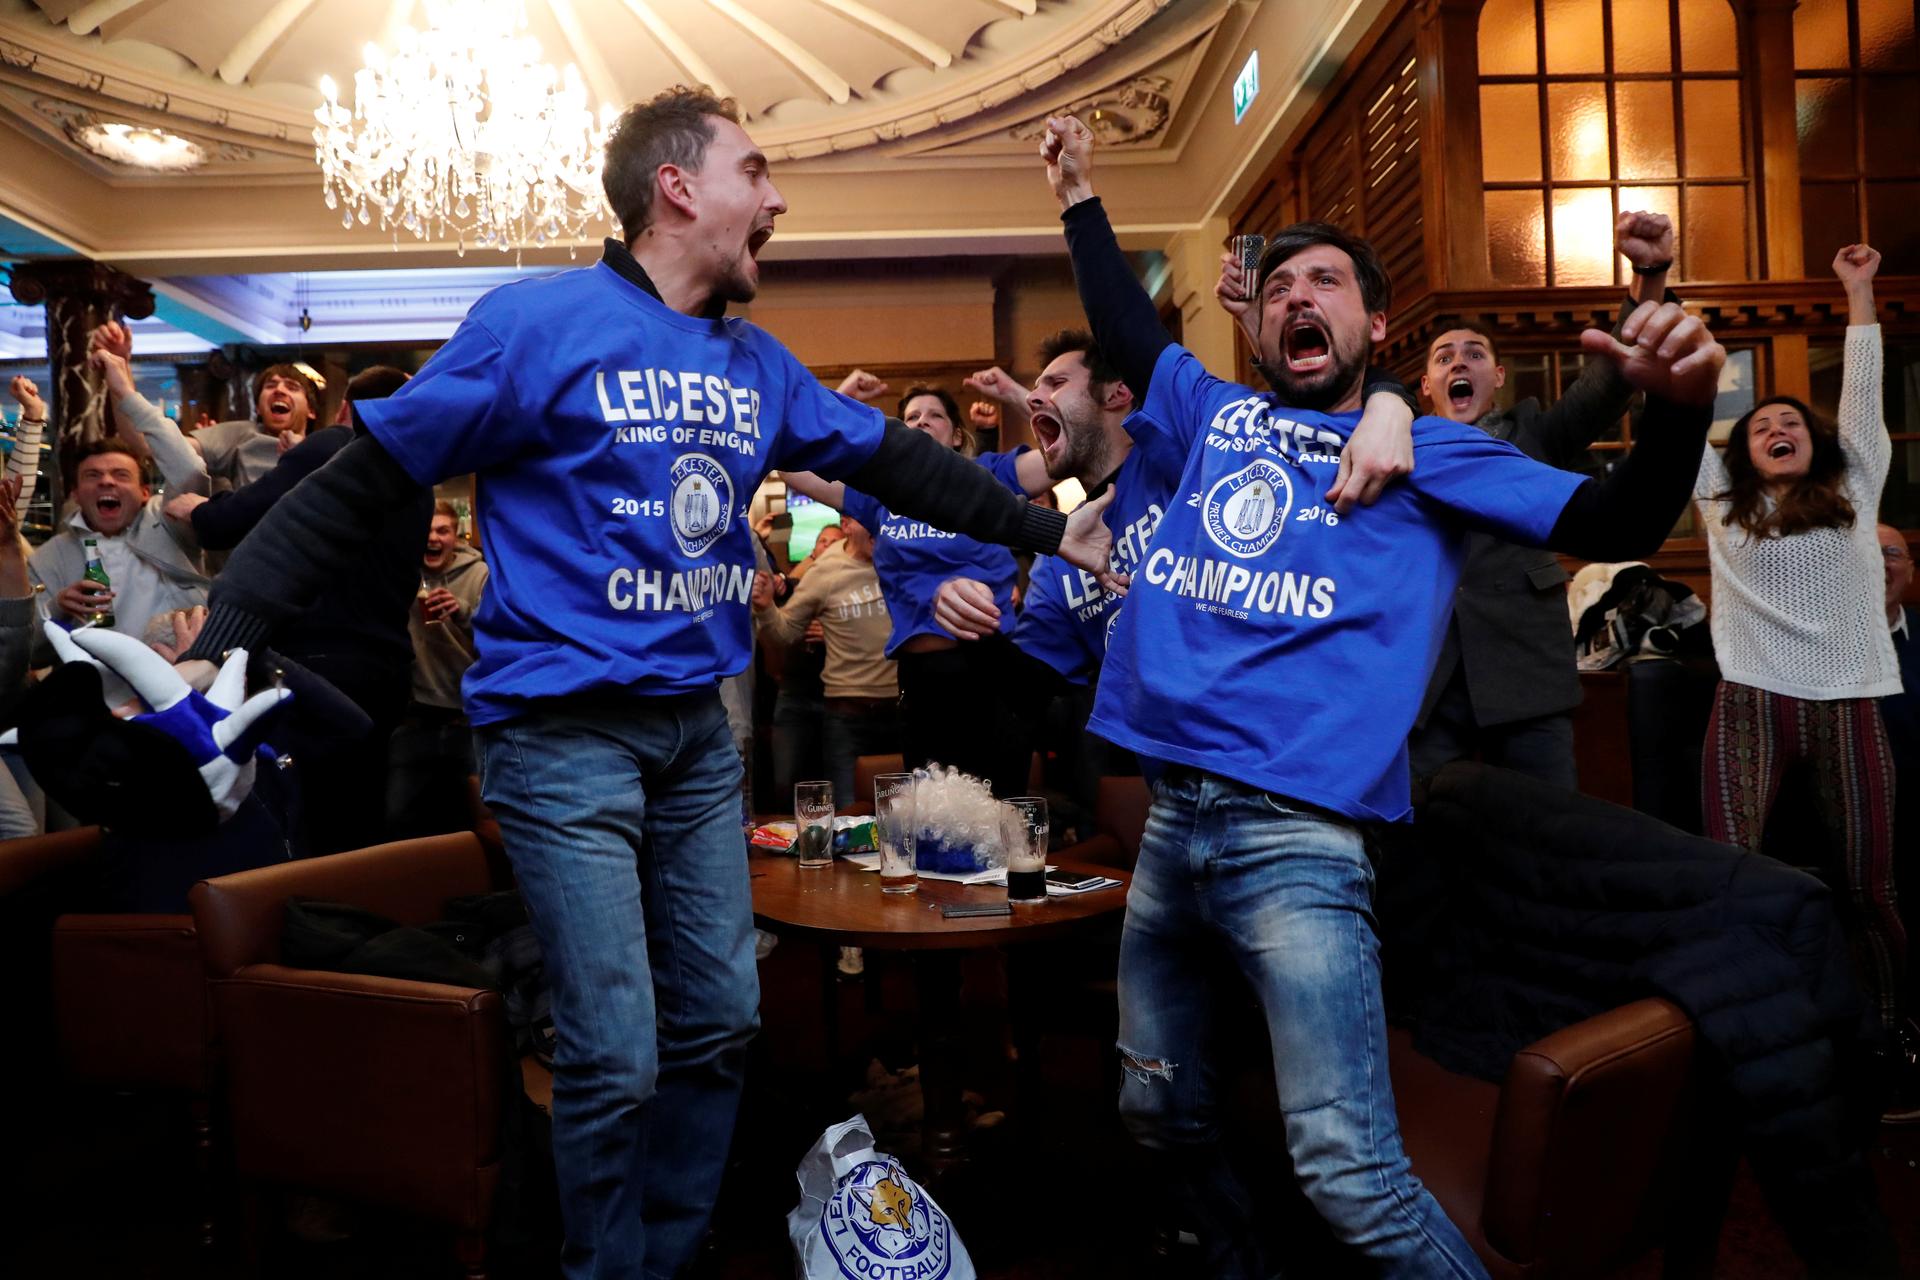 Leicester City fans watch the Chelsea v Tottenham Hotspur game in pub in Leicester.